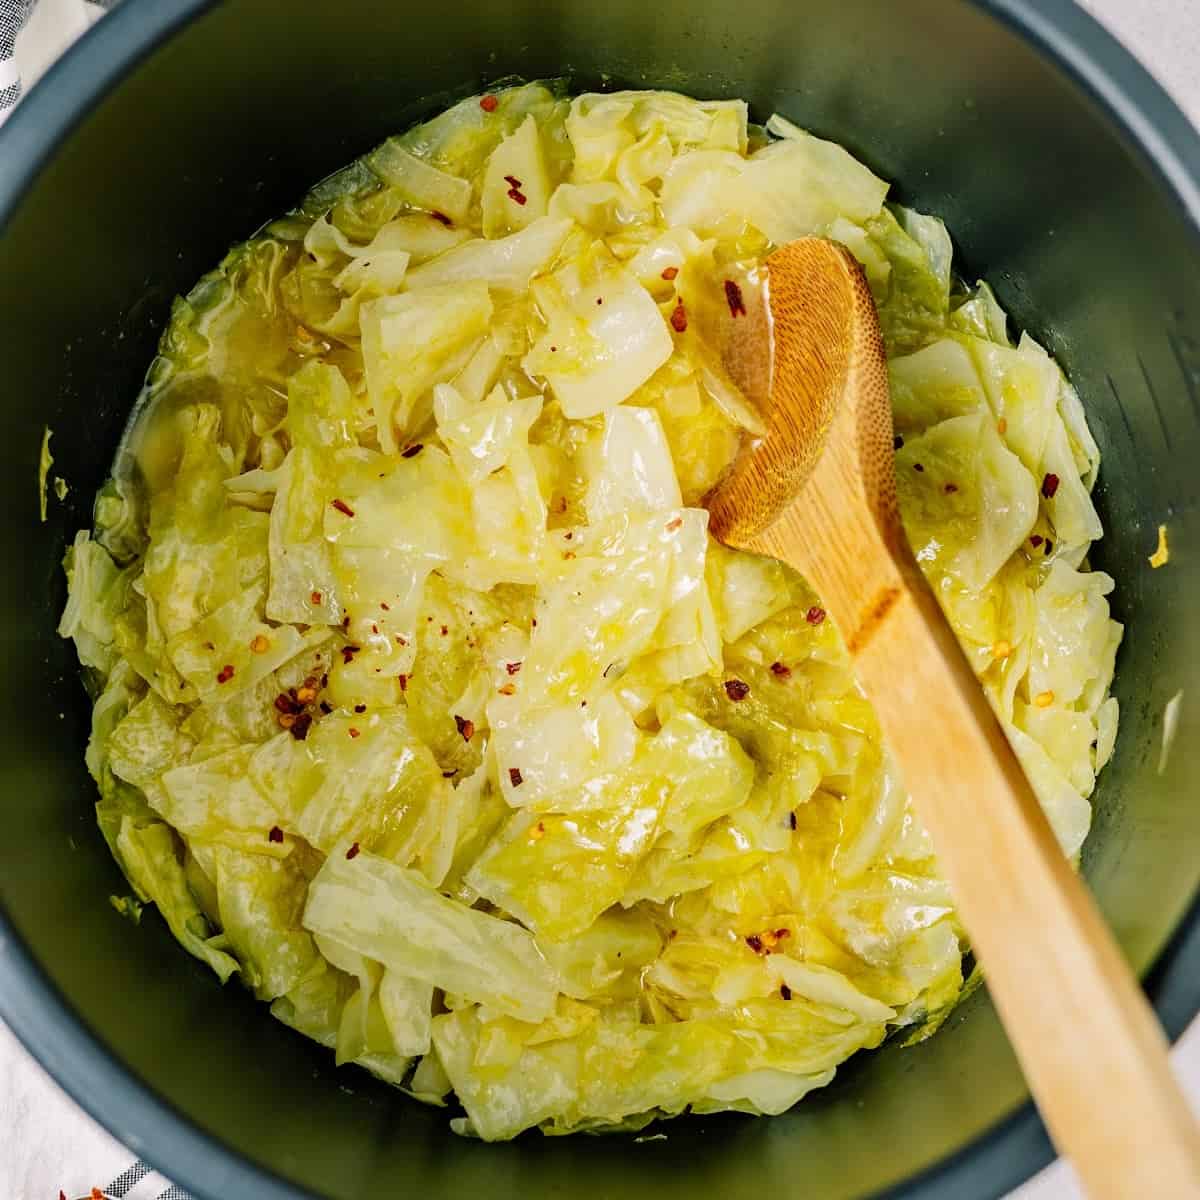 How Long To Cook Cabbage In An Electric Pressure Cooker